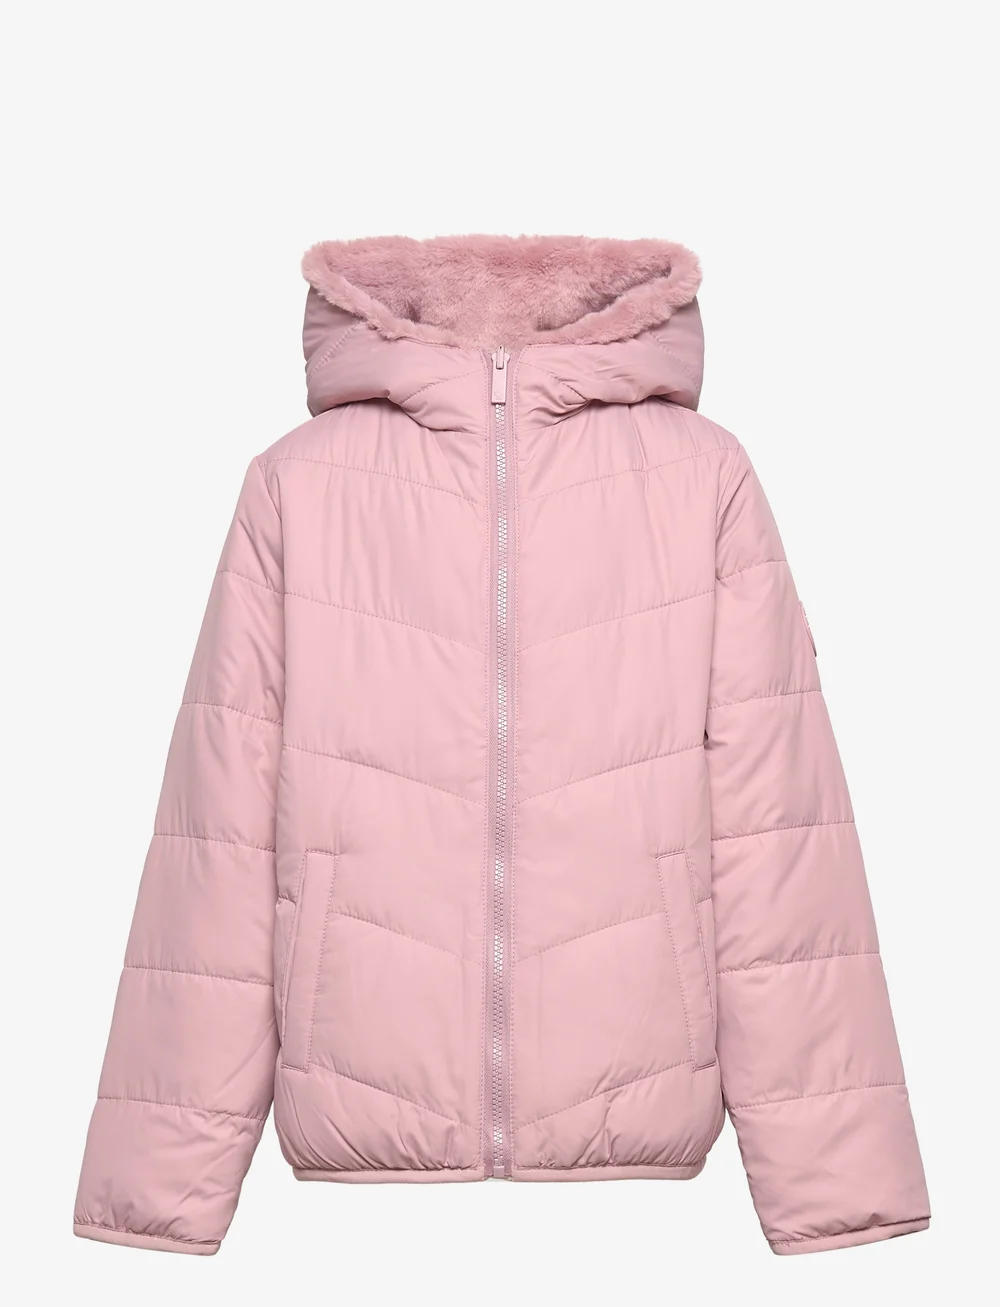 Abercrombie & Fitch Kids Girls Outerwear - 89 €. Buy Puffer & Padded from  Abercrombie & Fitch online at . Fast delivery and easy returns